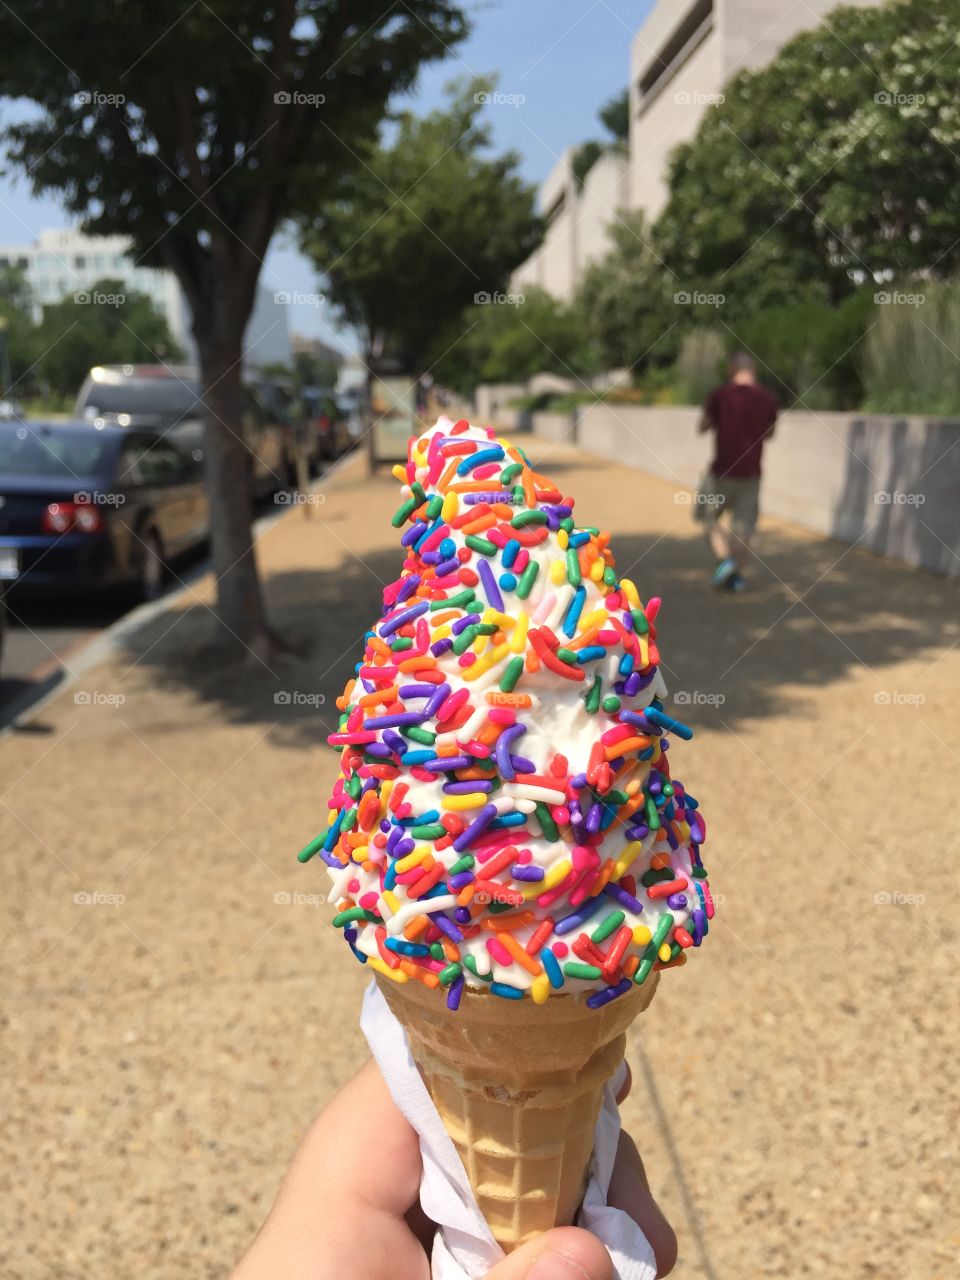 I am always tempted to try something new but almost always decide to go with what I know best. Vanilla with rainbow sprinkles. 